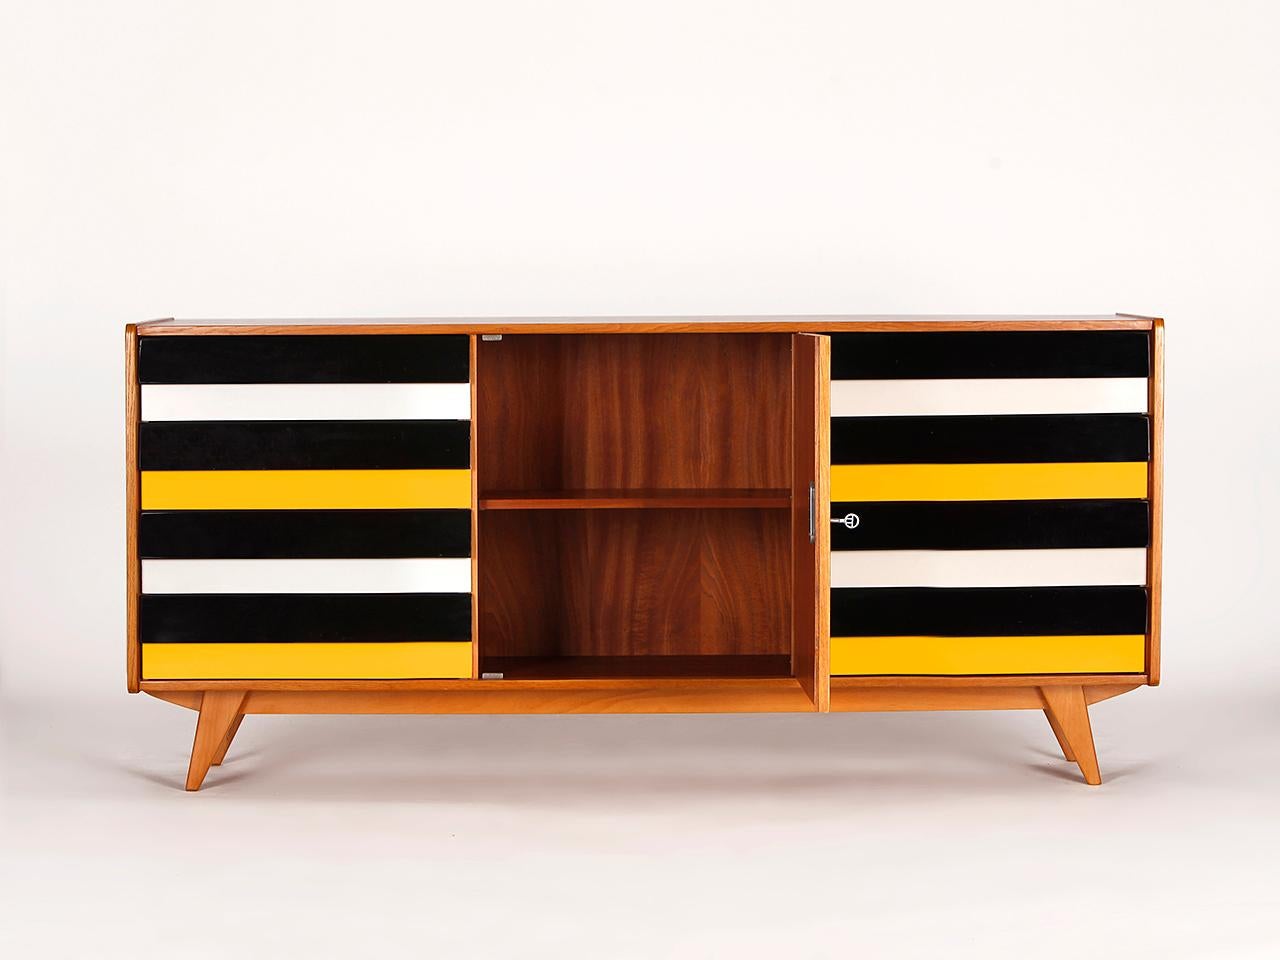 This model U-460 sideboard was designed by Jiri Jiroutek for Interier Praha in former Czechoslovakia. Produced in the 1960s. Completely restored. It is an early model with wooden drawers. Excellent condition. Delivery time 3-4 weeks.

